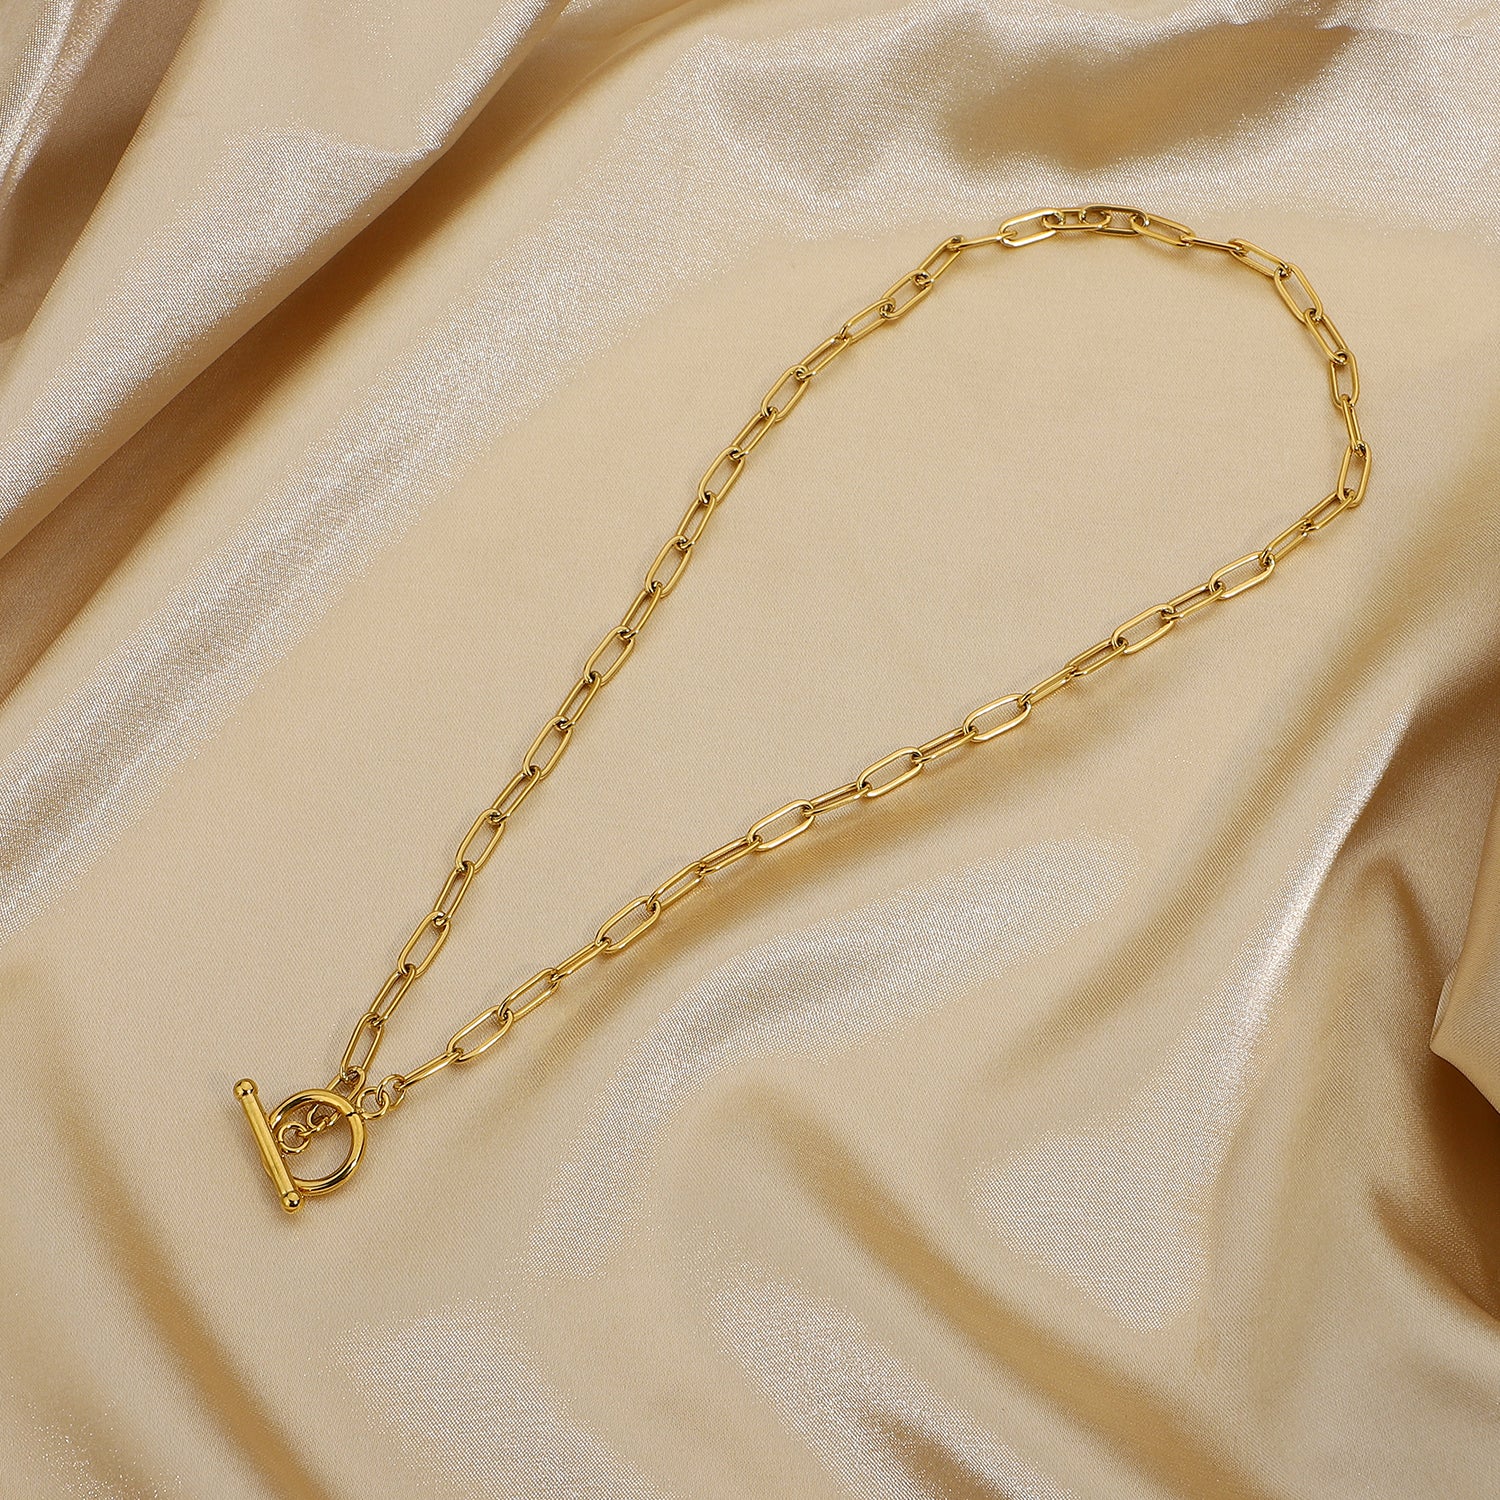 Chain Stainless Steel Necklace